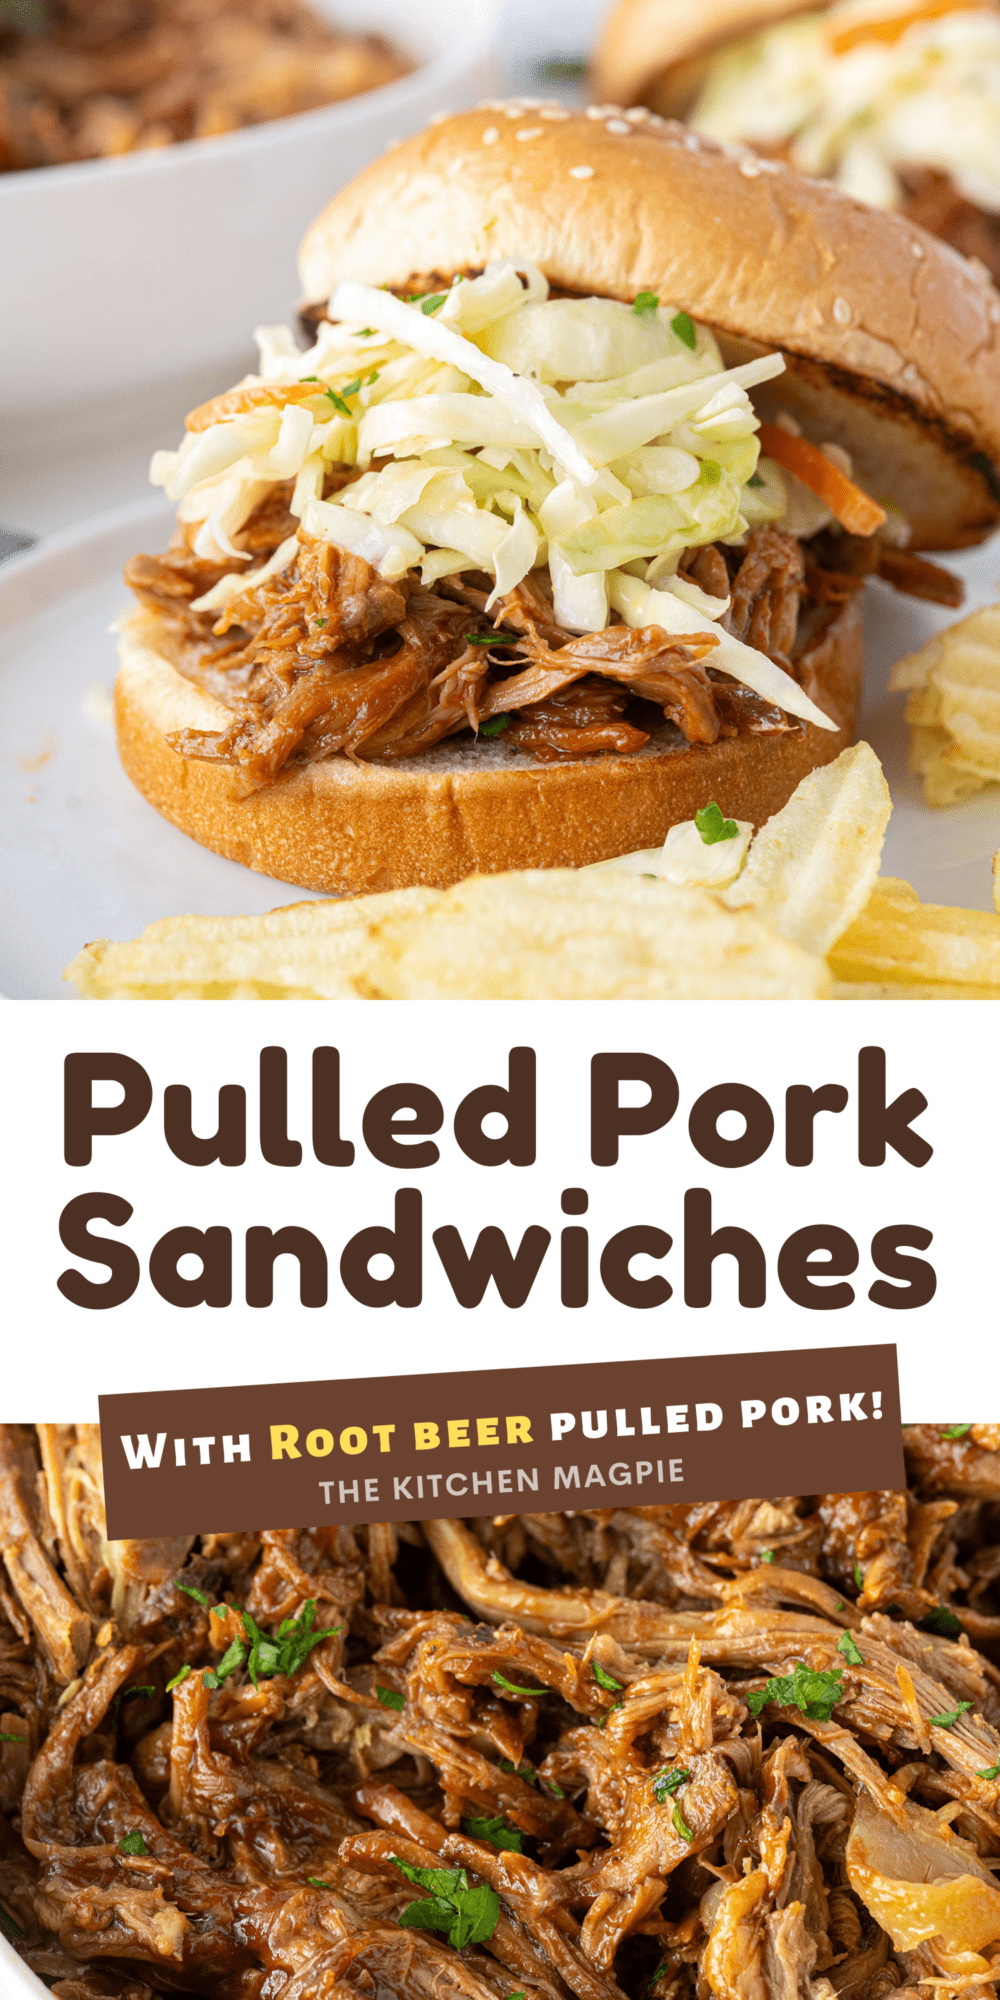 Incredibly easy 3 ingredient pulled pork that is made into pulled pork sandwiches by adding in toasted buns and a fast homemade coleslaw!